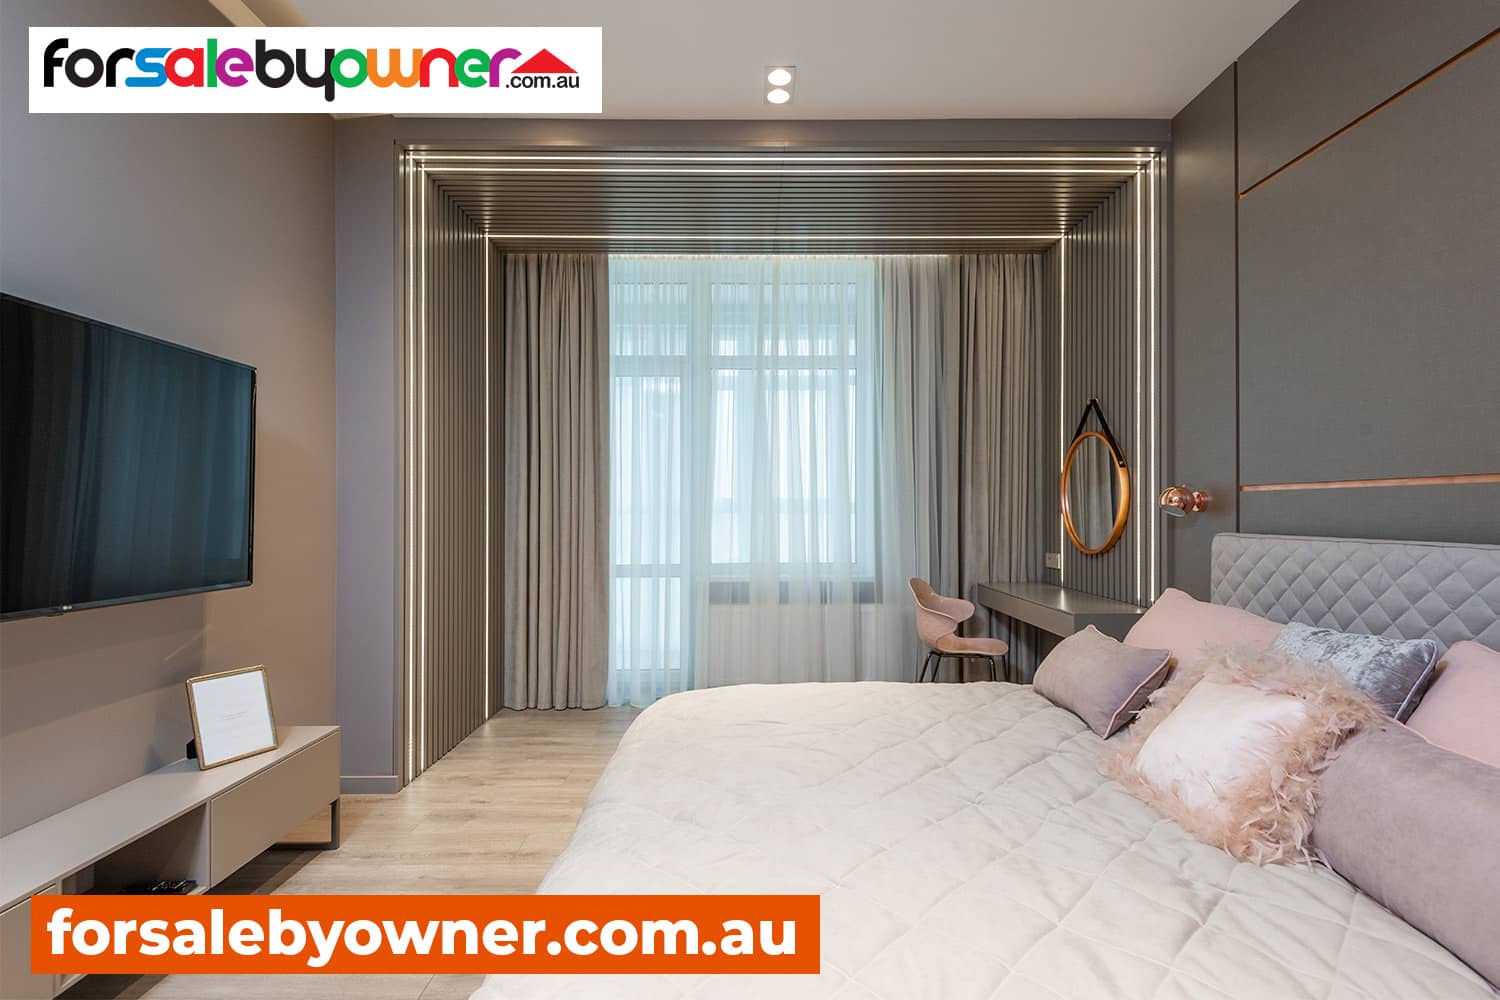 For Sale By Owner NSW | Sell My House New South Wales